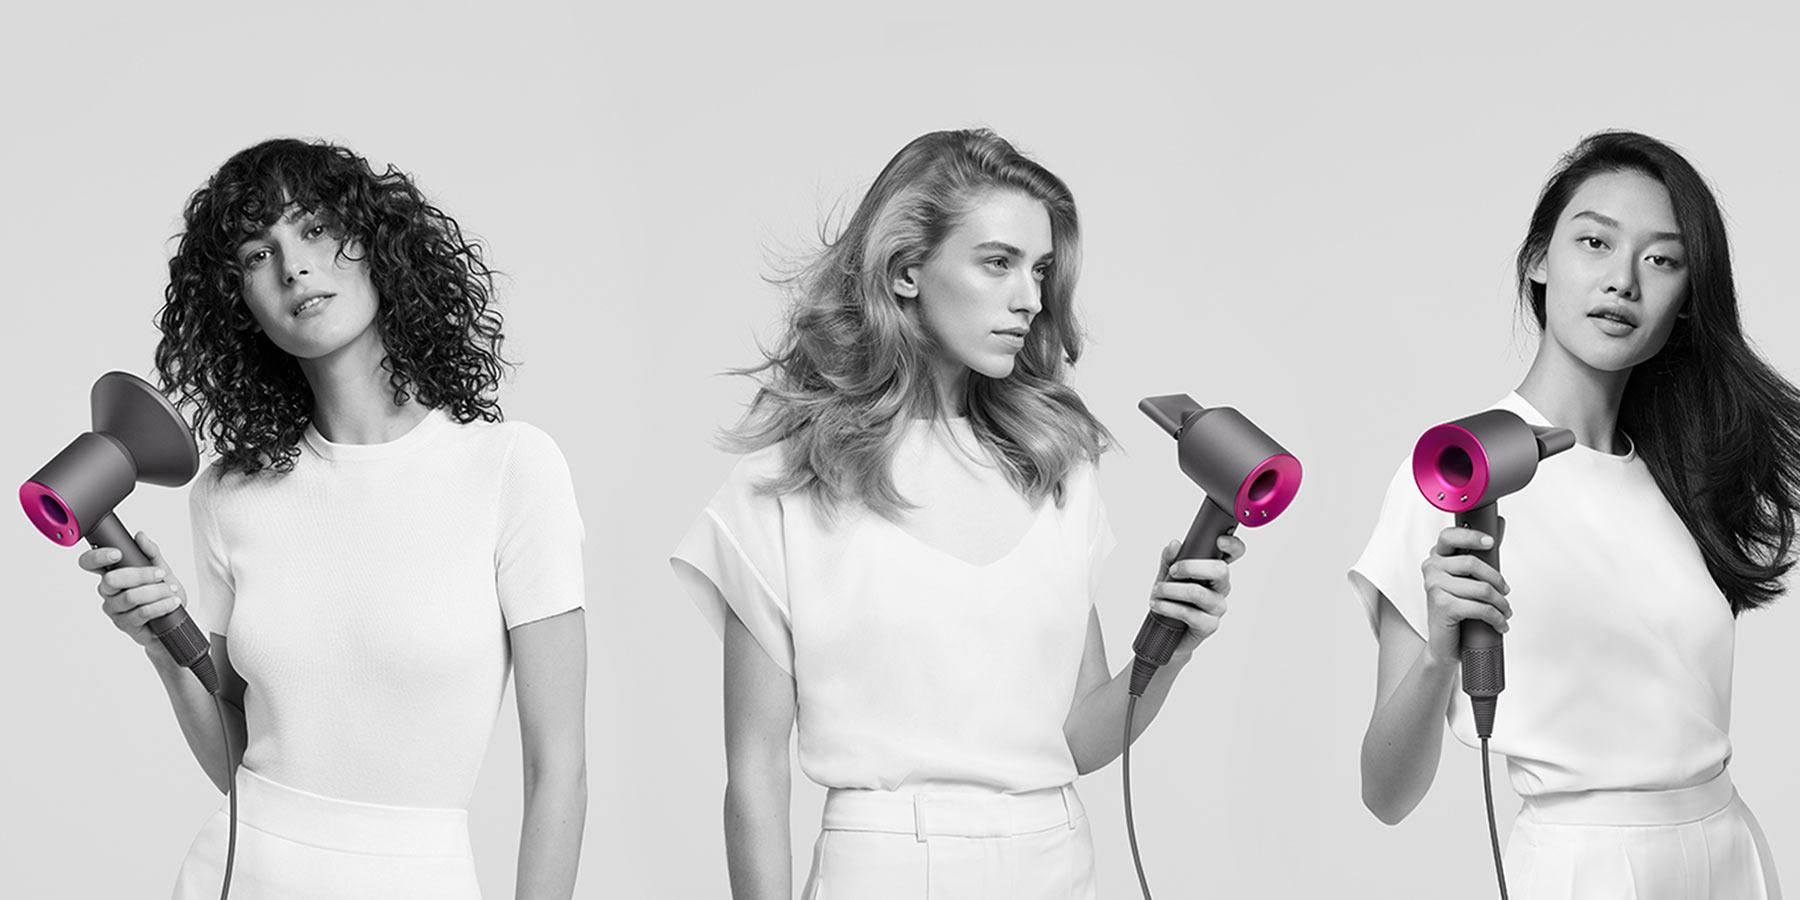 Complimentary Styling with Dyson Hair care January 20 - January 24 2019